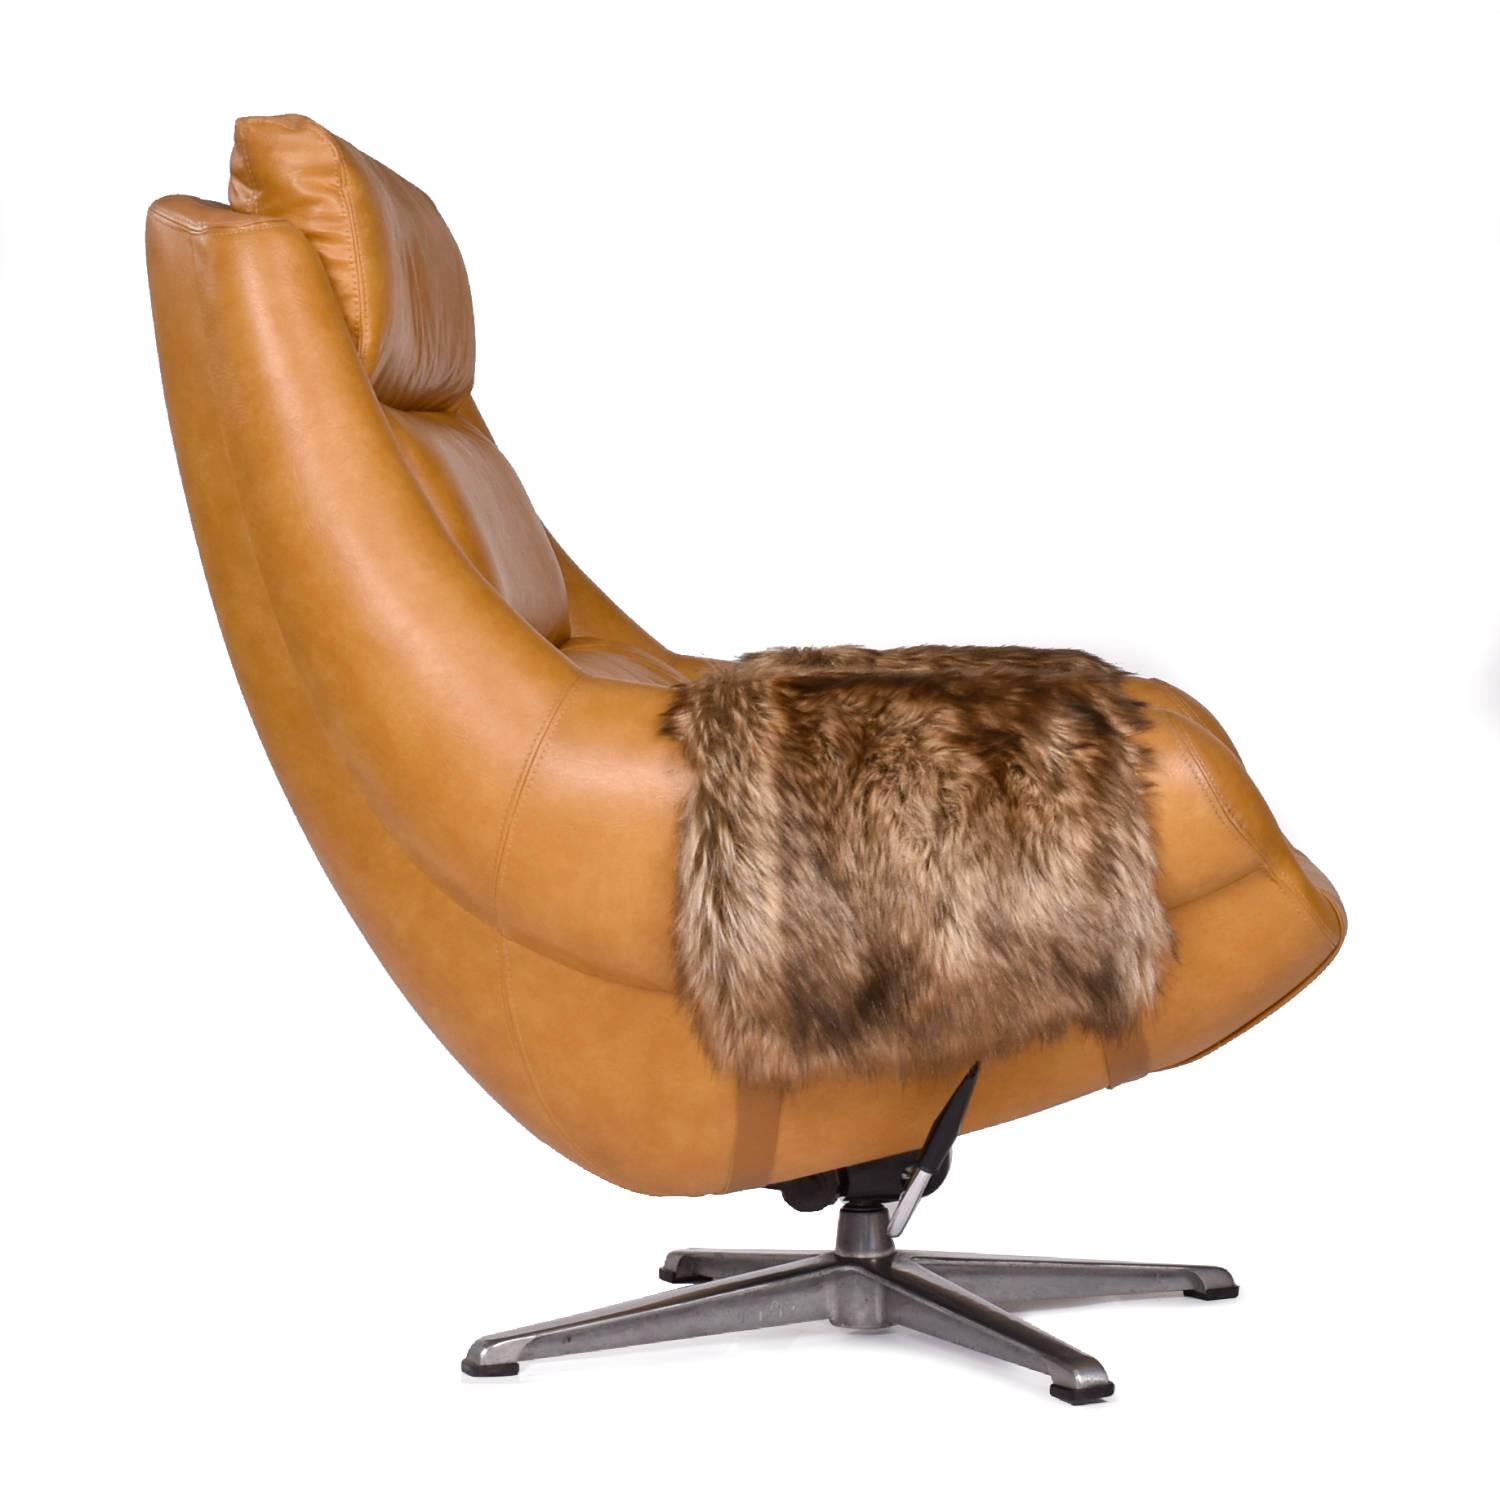 American Mid-Century Modern 1970s Swivel Pod Chair Recliner with Faux Fur Arms For Sale